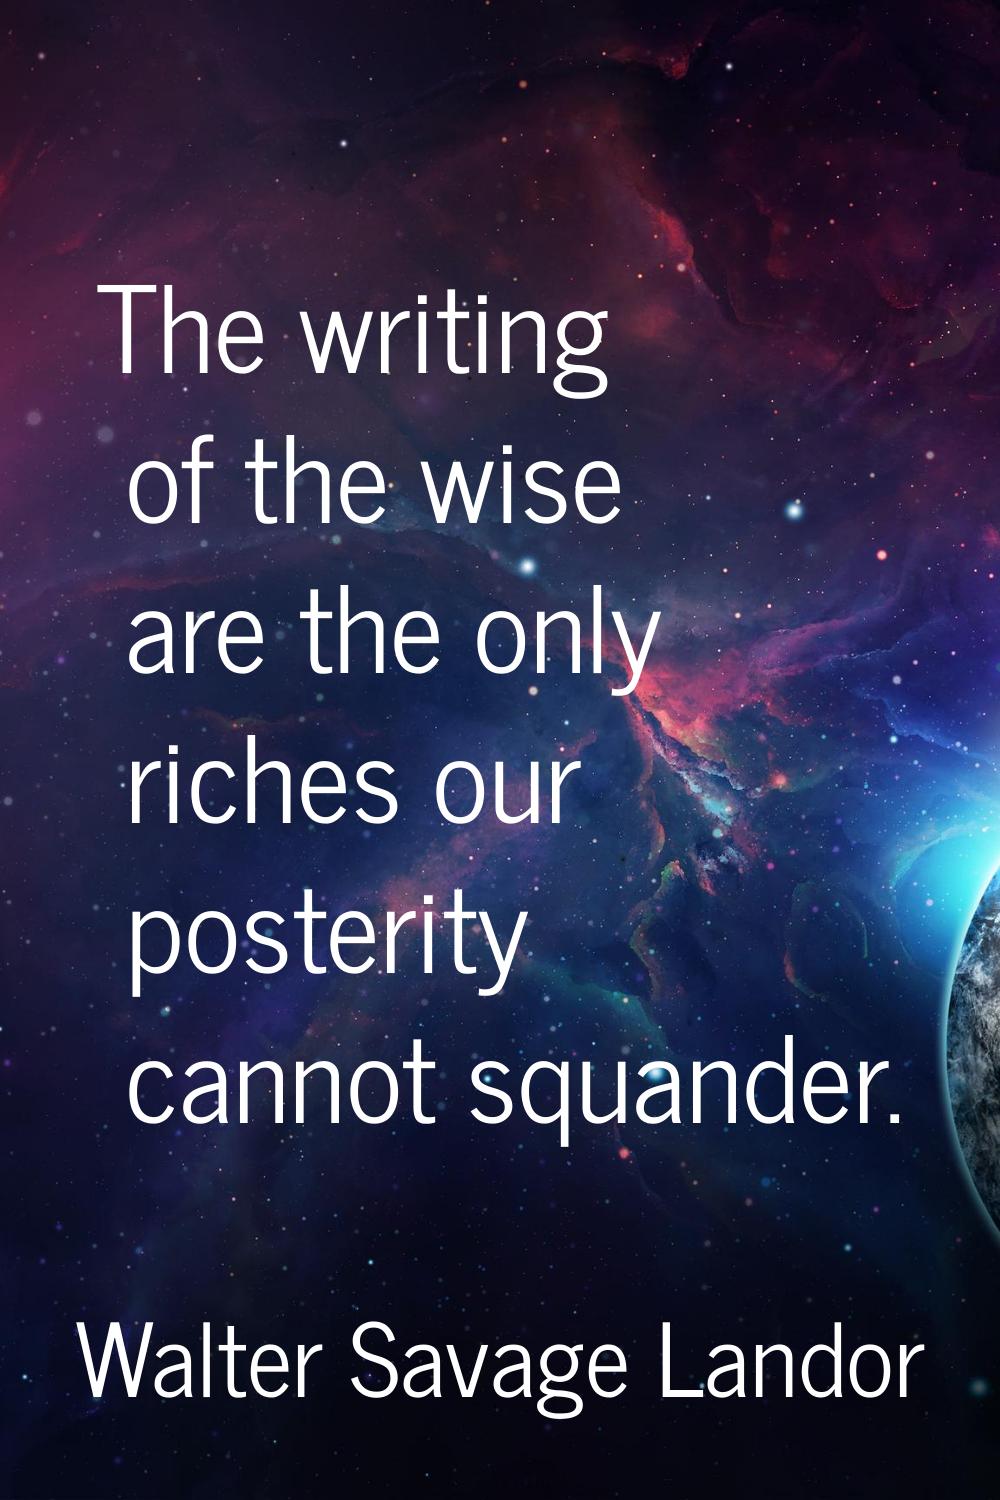 The writing of the wise are the only riches our posterity cannot squander.